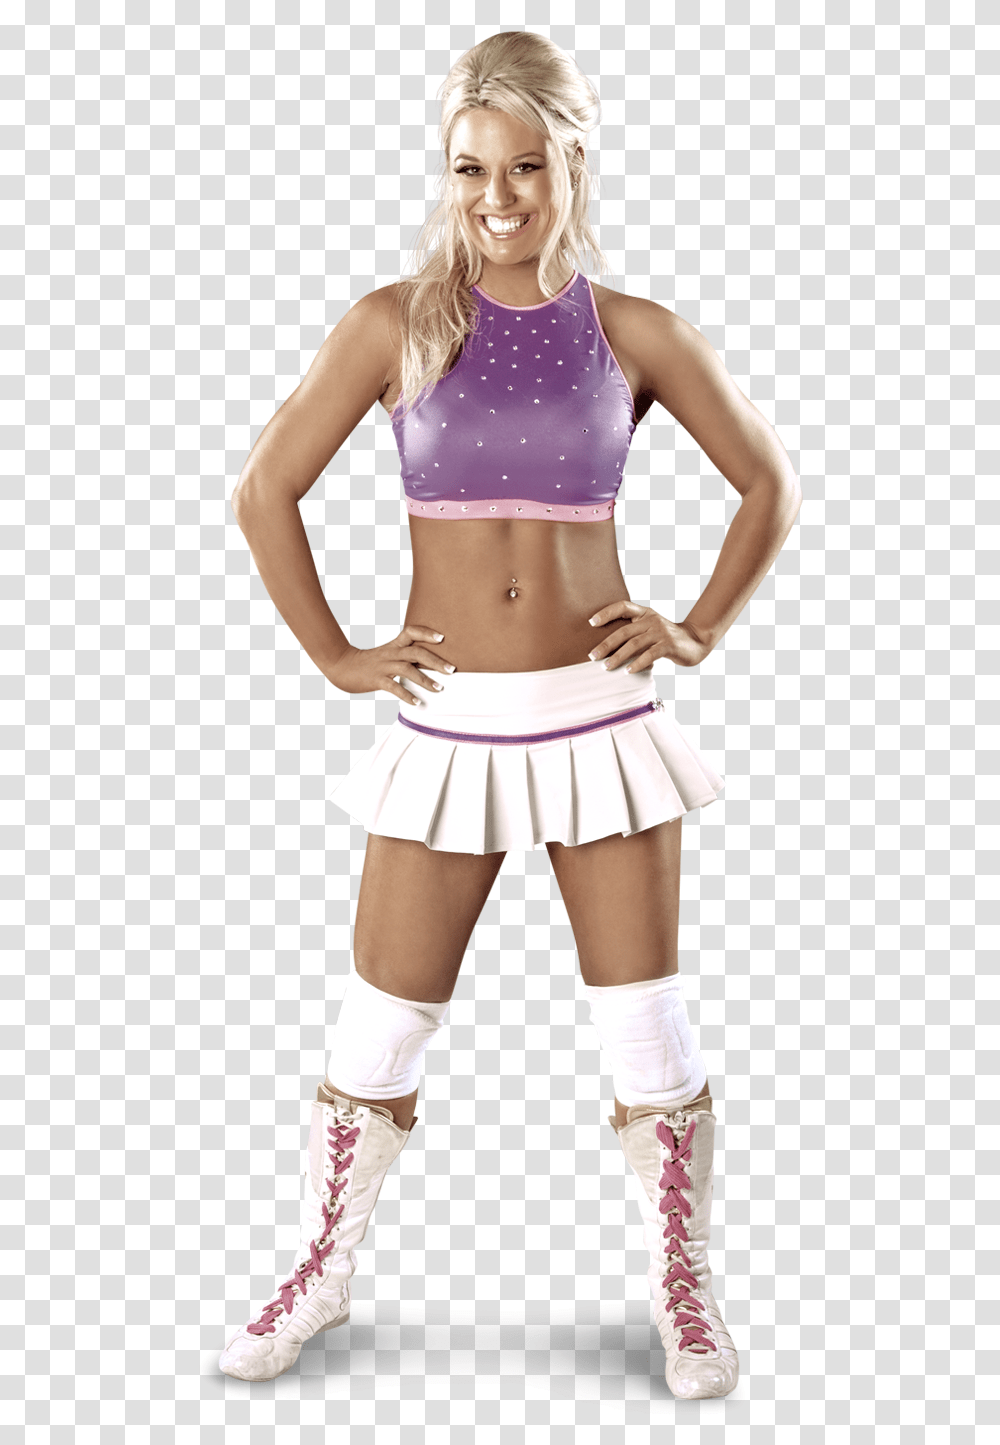 Maria Kanellis Kaley Cuoco Top, Skirt, Person, Female Transparent Png